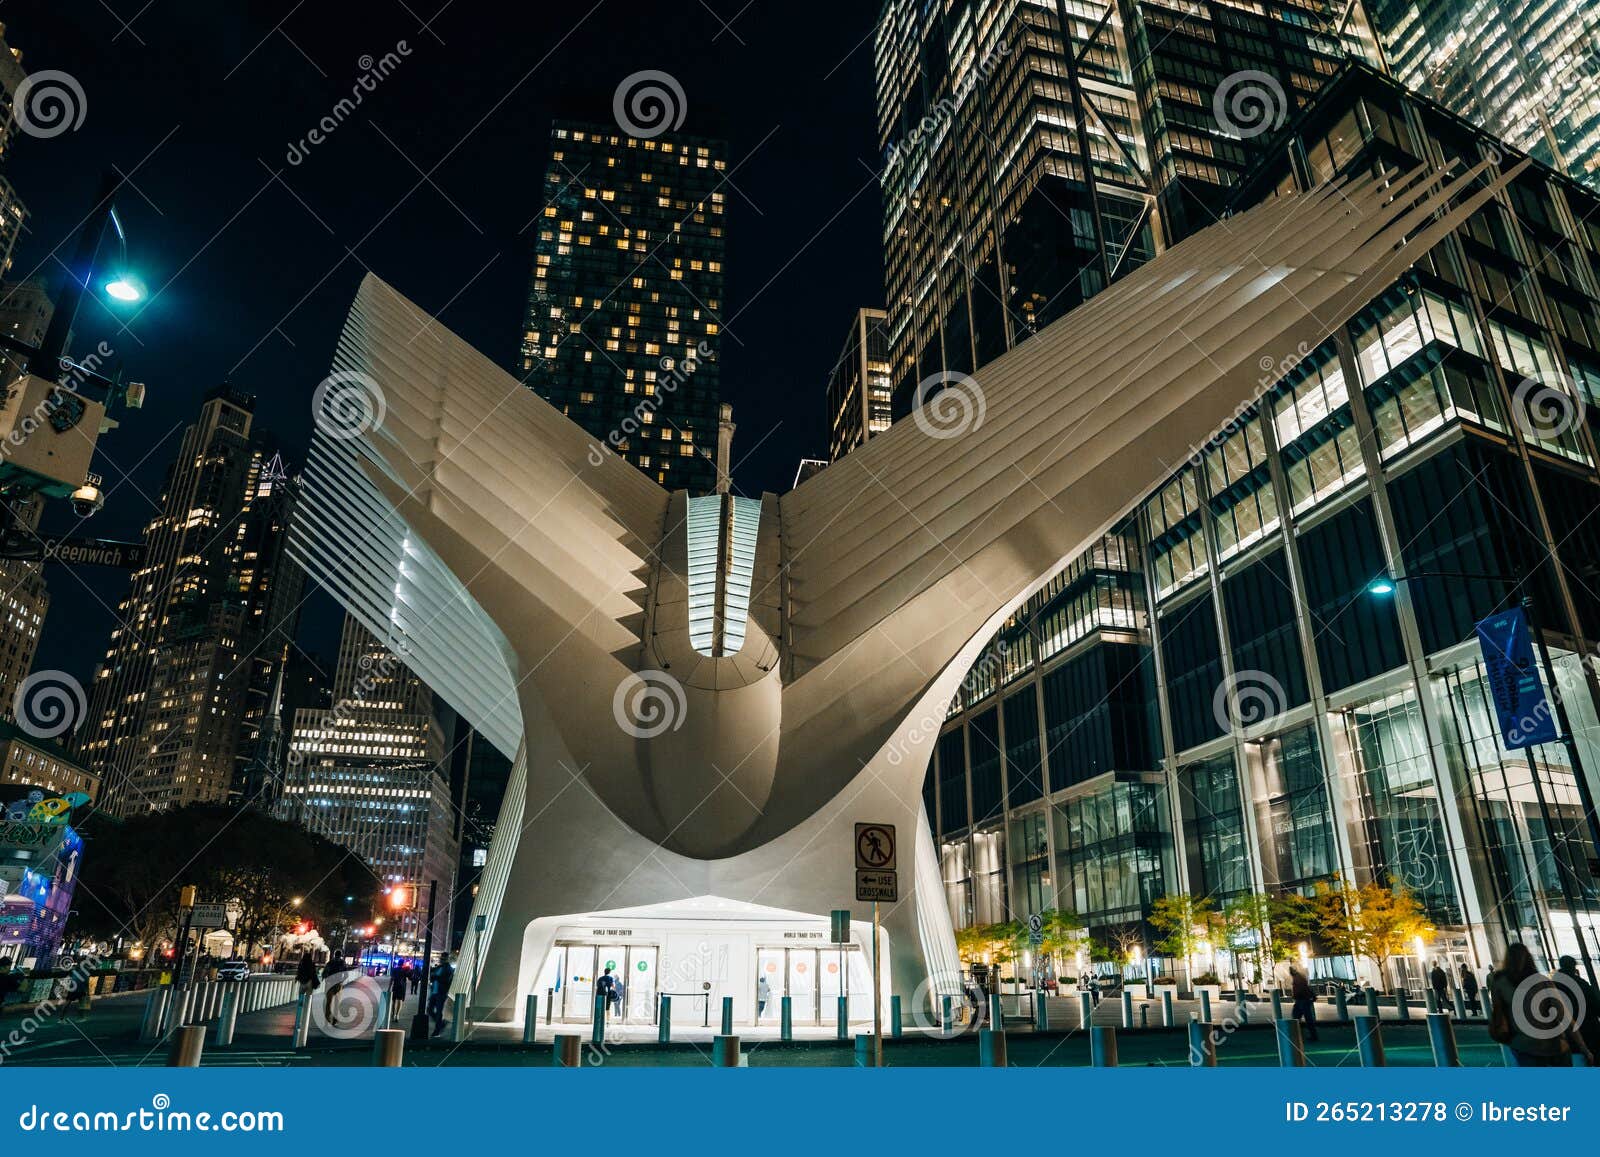 new york city, usa - oct, 2022: people shopping in westfield world trade center in manhattan